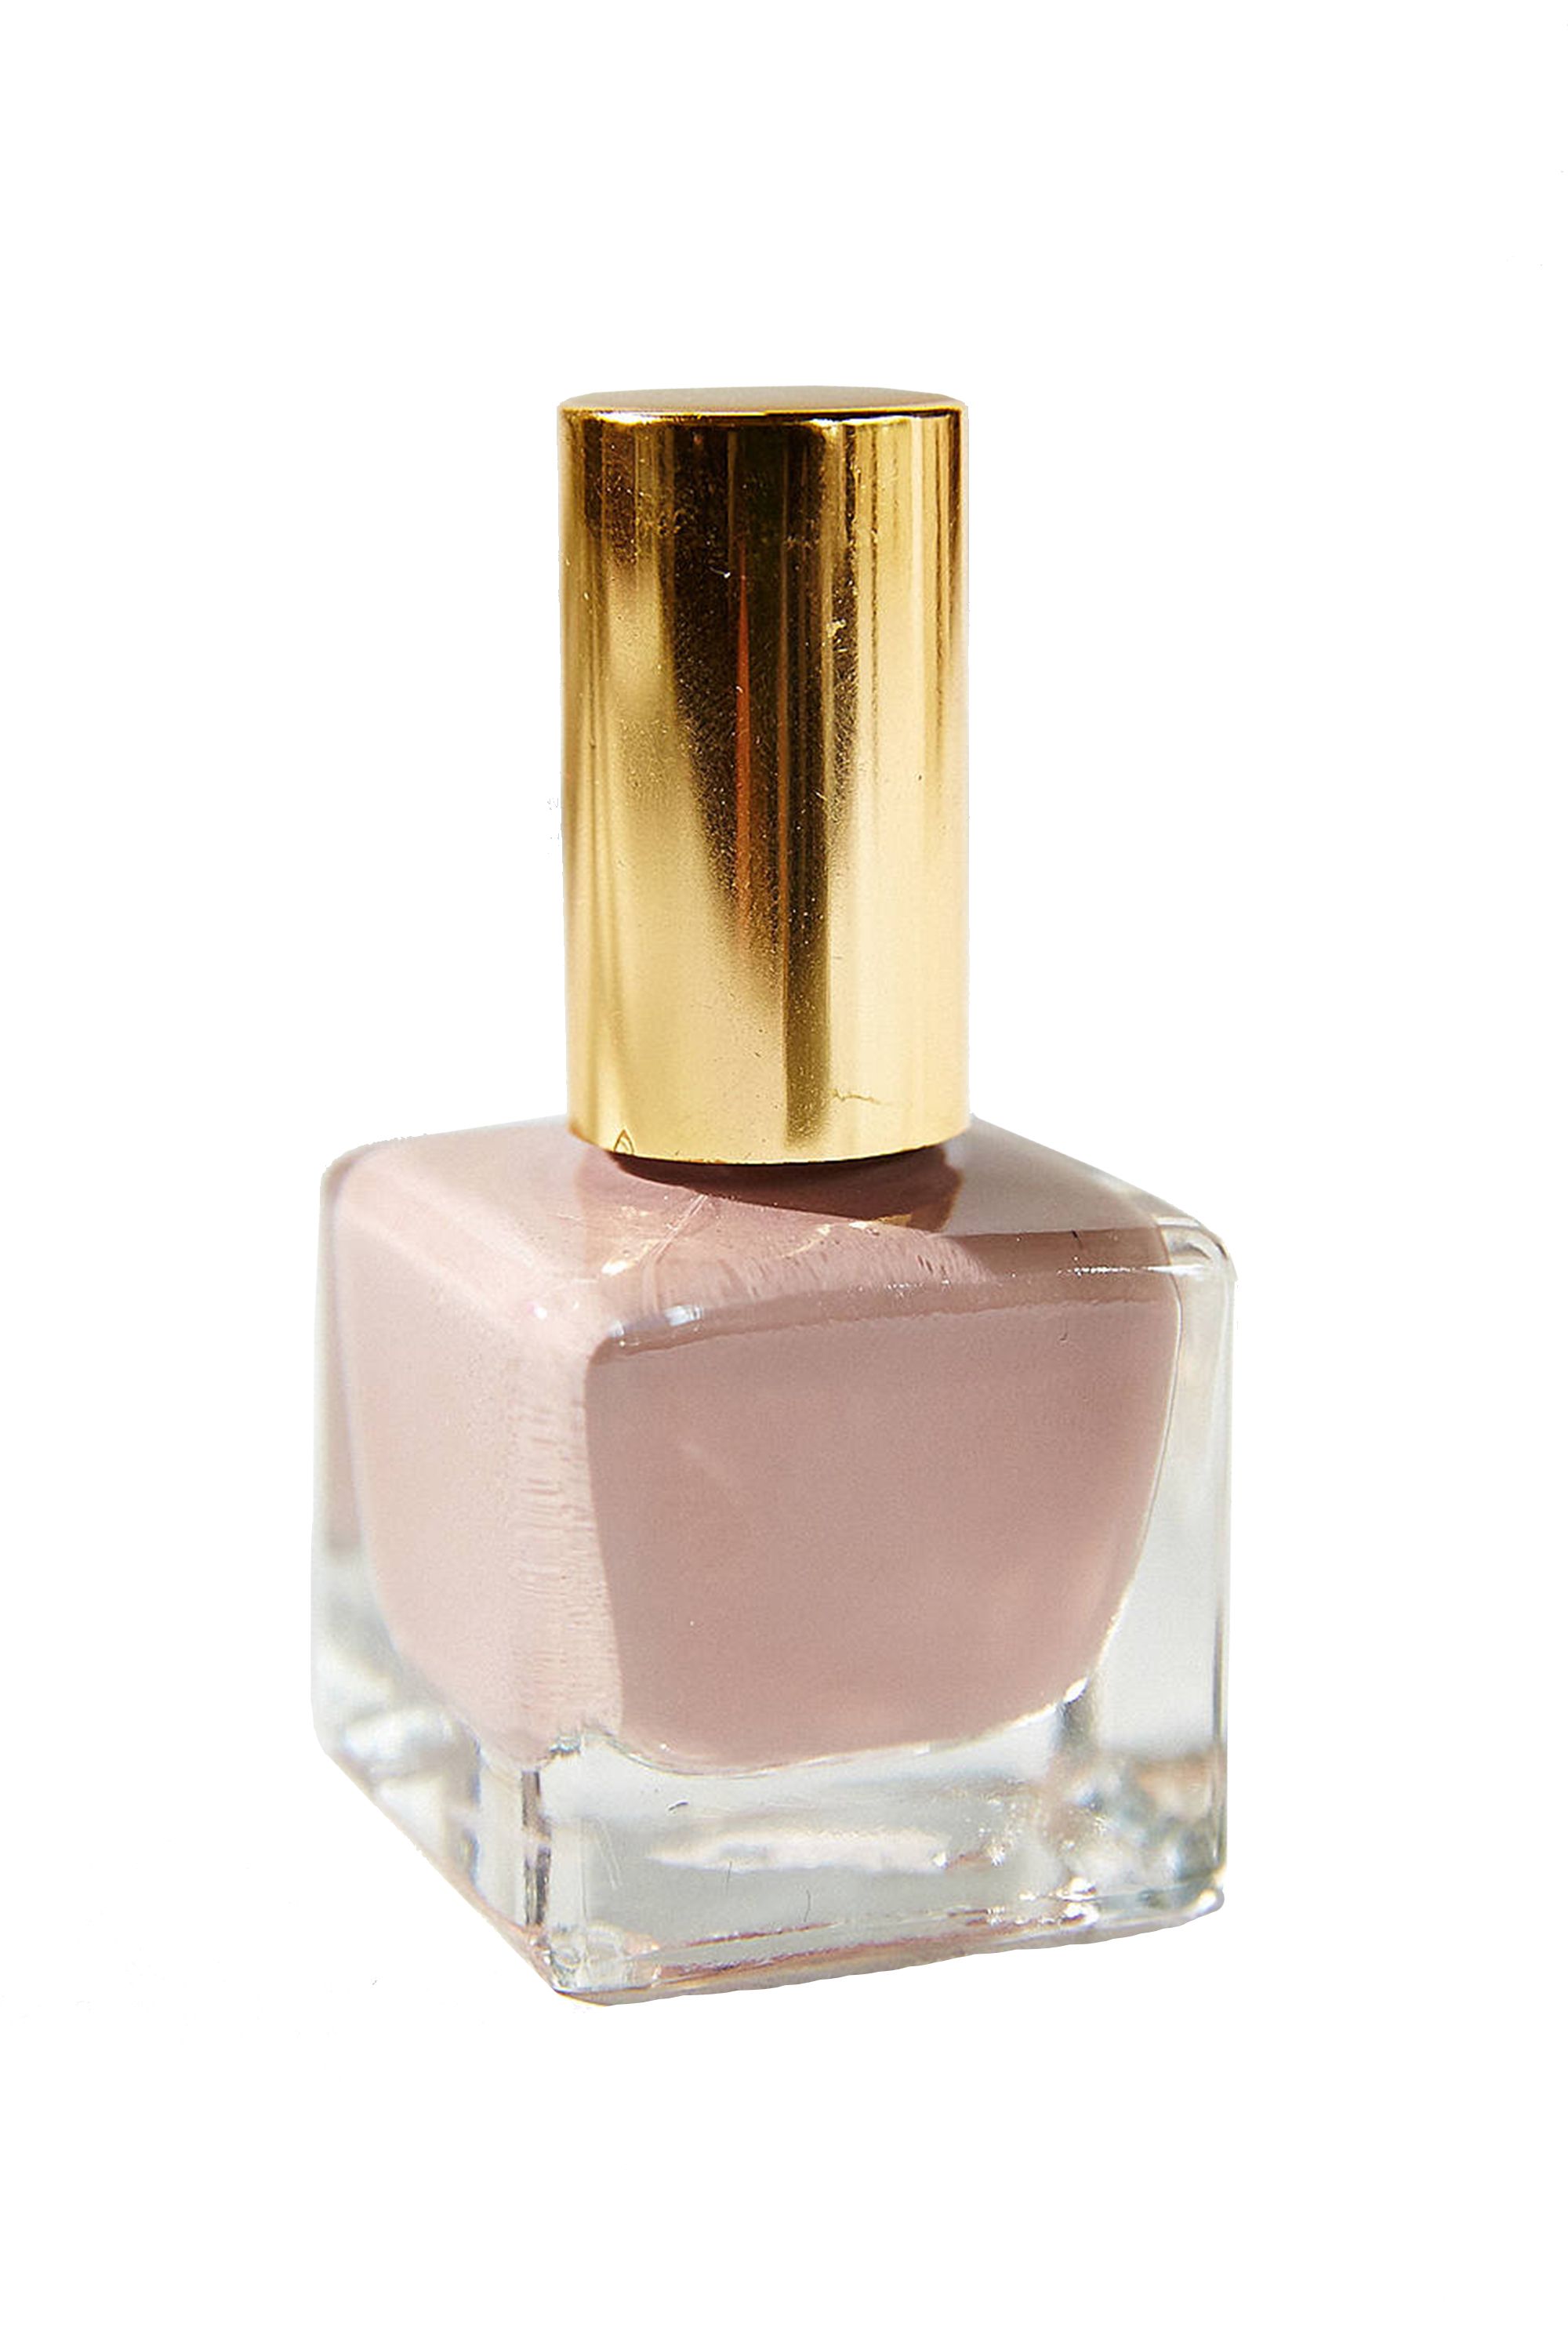 32 Nude Nail Polish Colors - Find the Best Neutral Nail Colors for Every  Skin Tone